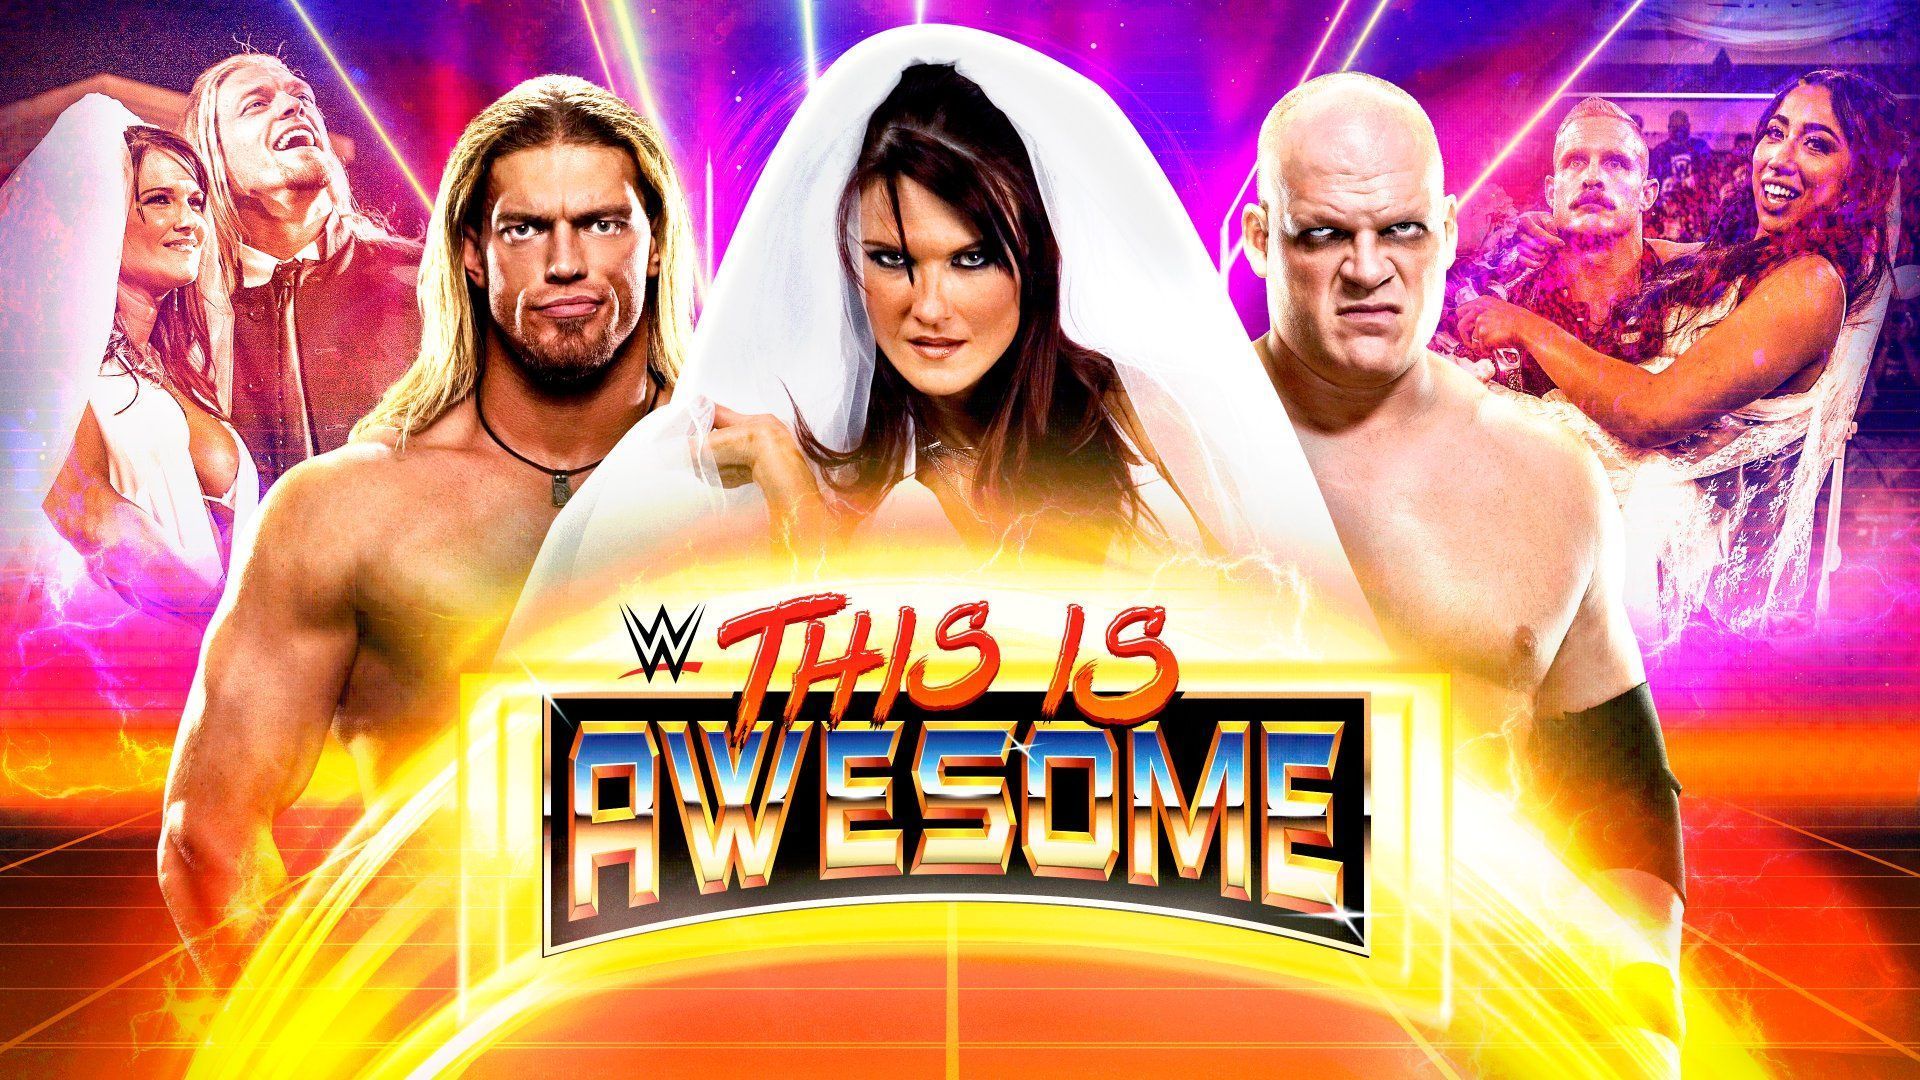 A new episode of WWE This Is Awesome will stream on Friday